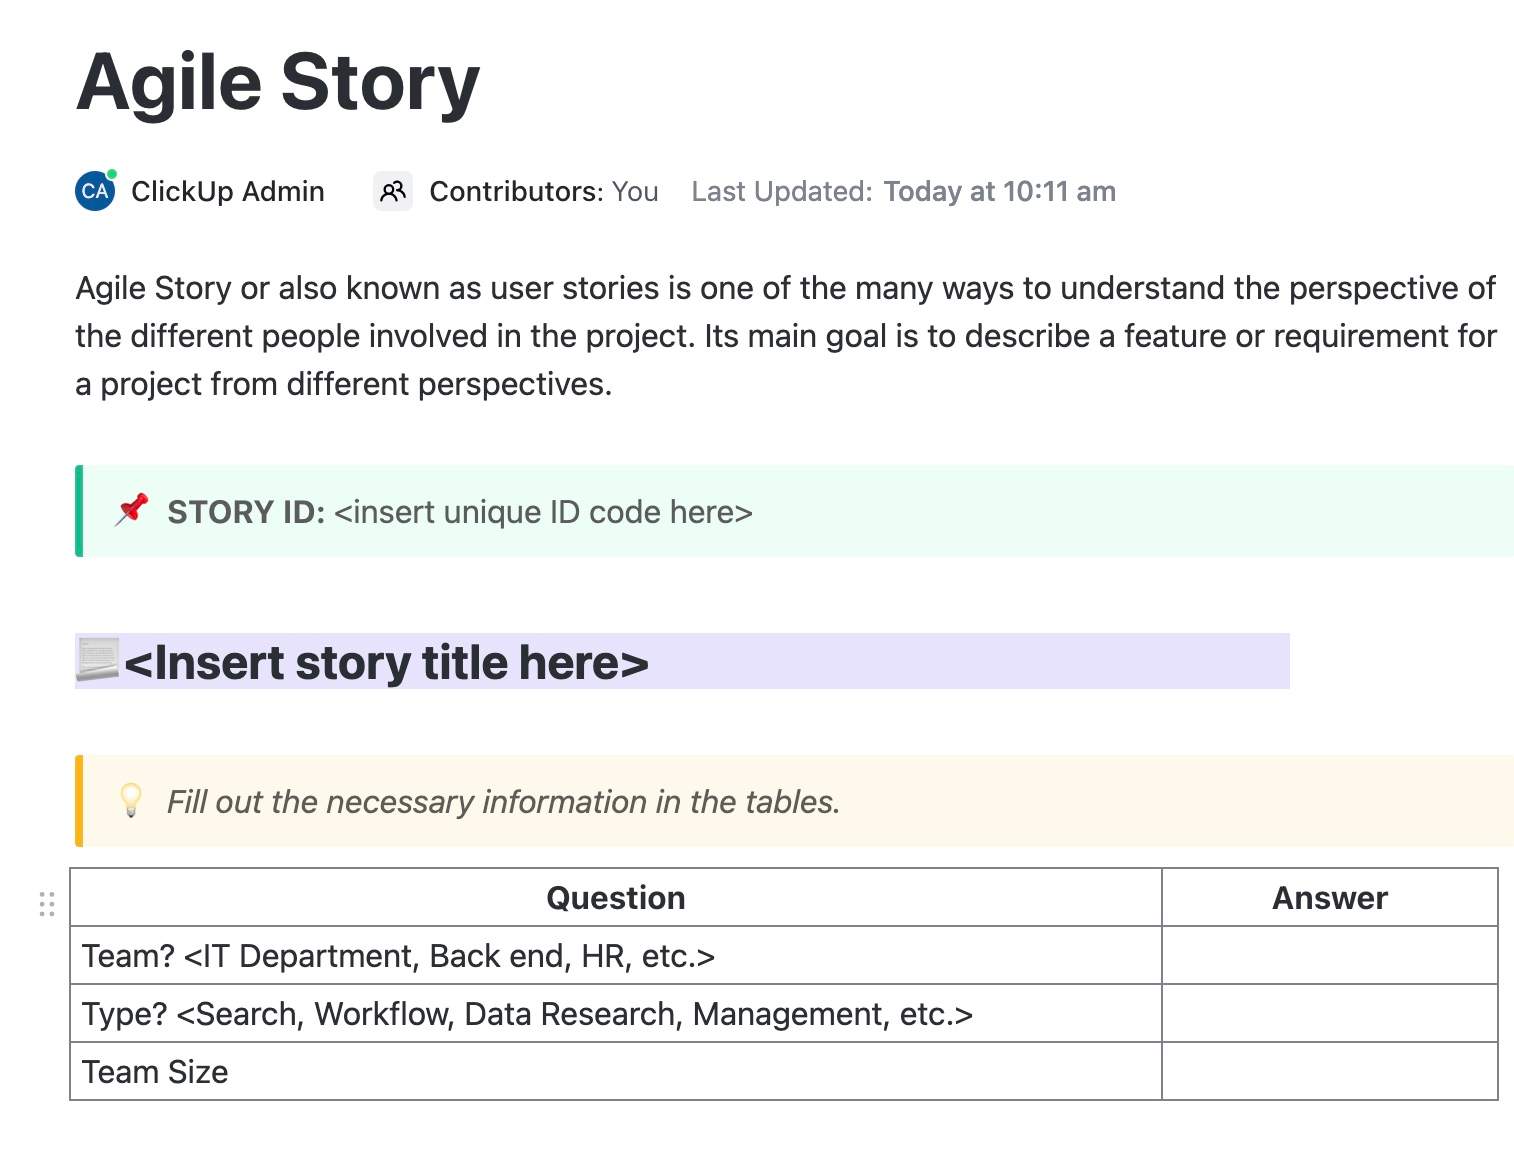 Agile story or also known as user story is one of the many ways to understand the perspective of the different people involved in the project. Its main goal is to describe a feature or requirement for a project from different perspectives.